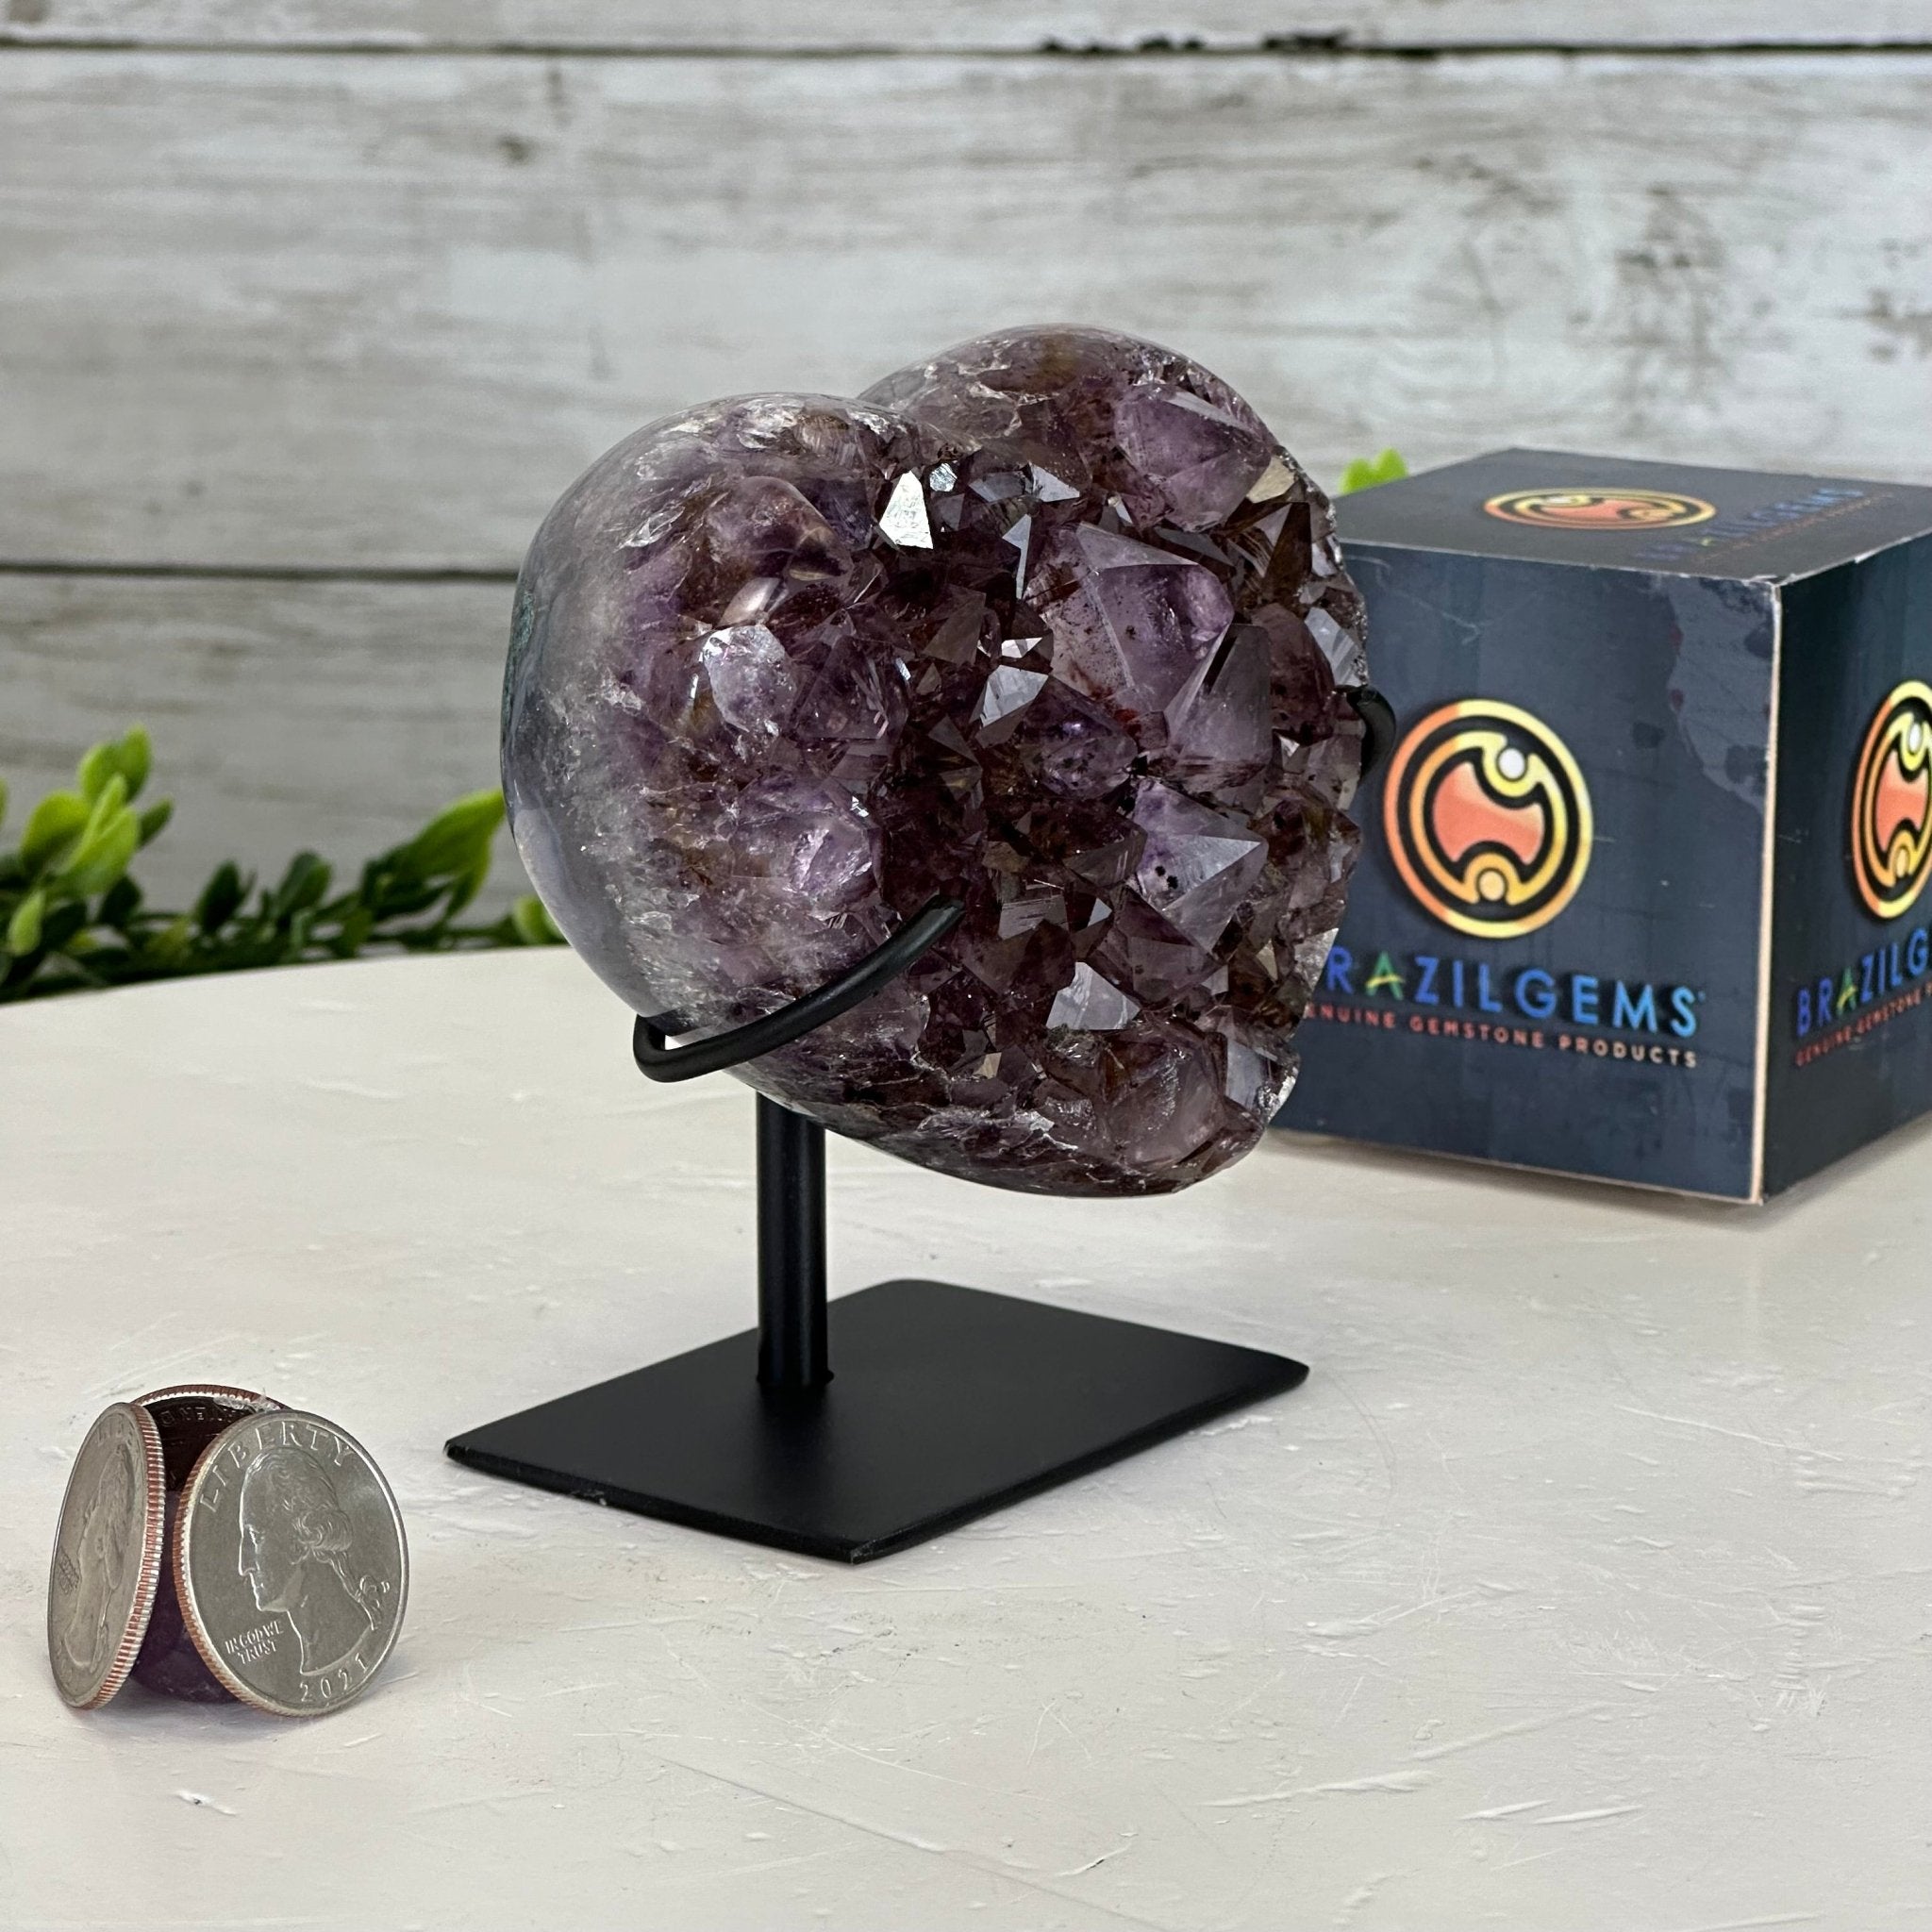 Extra Quality Amethyst Heart Geode w/ metal stand, 1.1 lbs & 3.9" Tall #5463-0295 - Brazil GemsBrazil GemsExtra Quality Amethyst Heart Geode w/ metal stand, 1.1 lbs & 3.9" Tall #5463-0295Hearts5463-0295